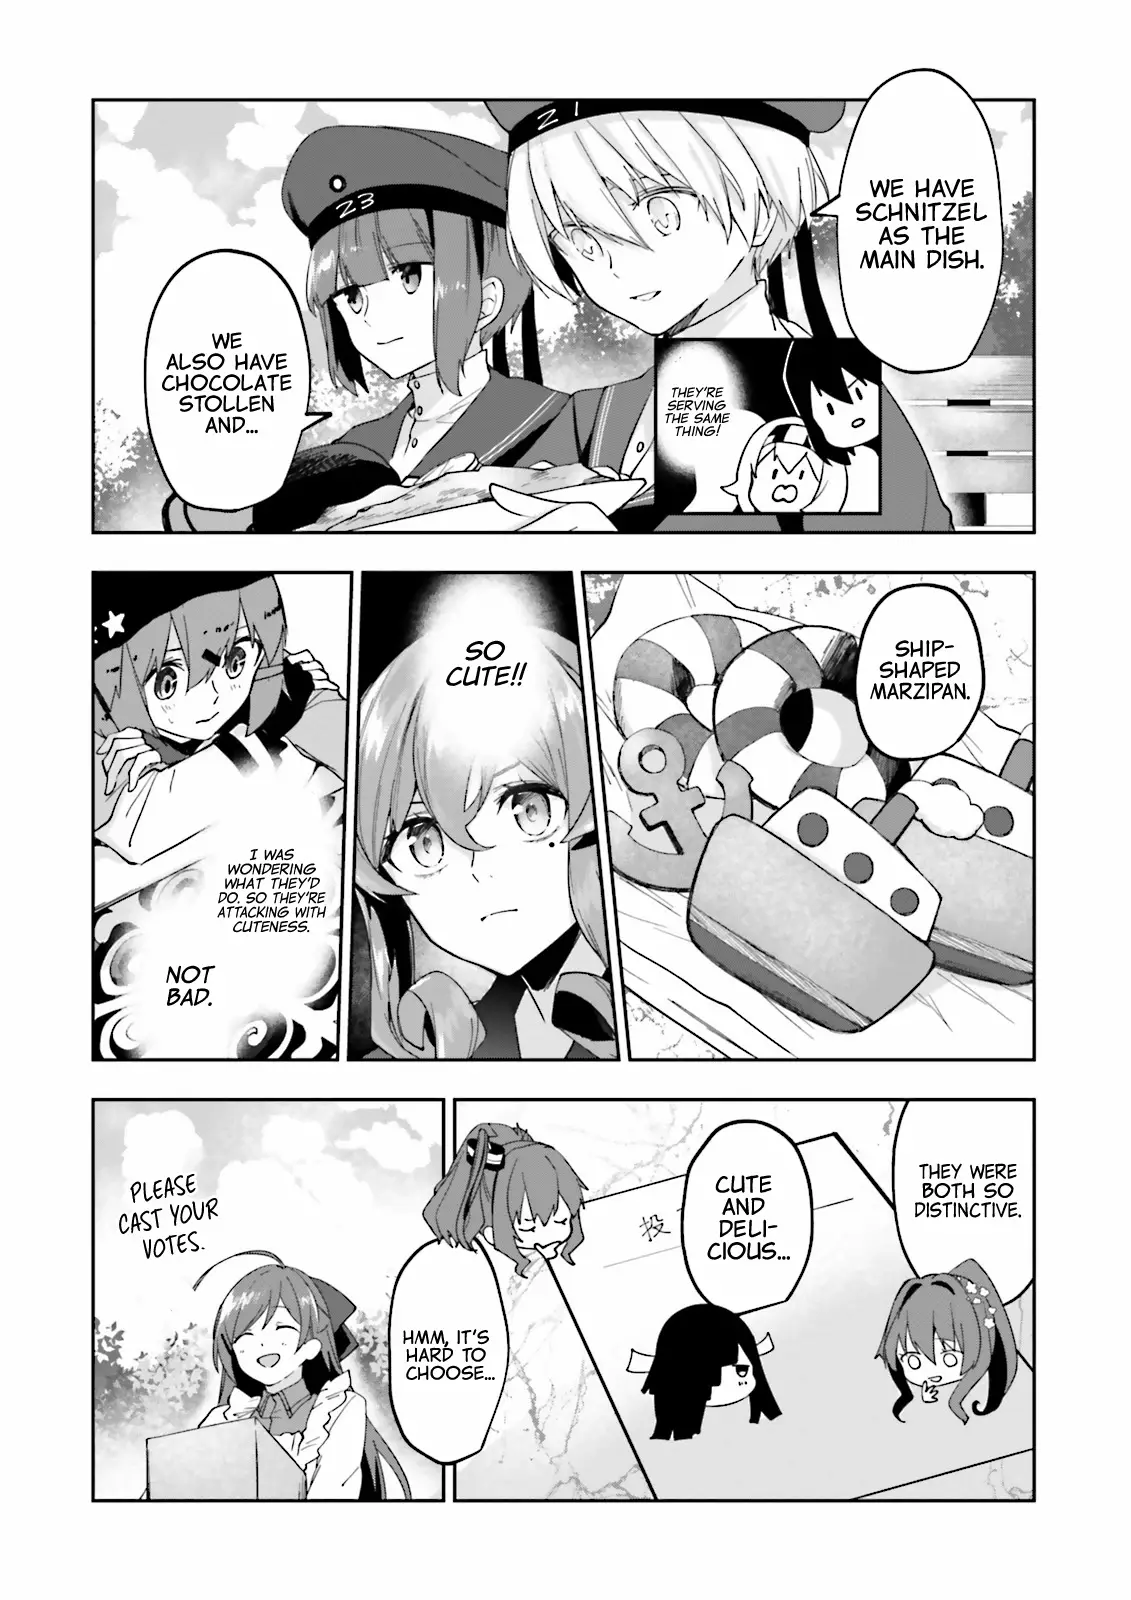 Kantai Collection -Kancolle- Tonight, Another "salute"! - 21 page 19-f3855ed7